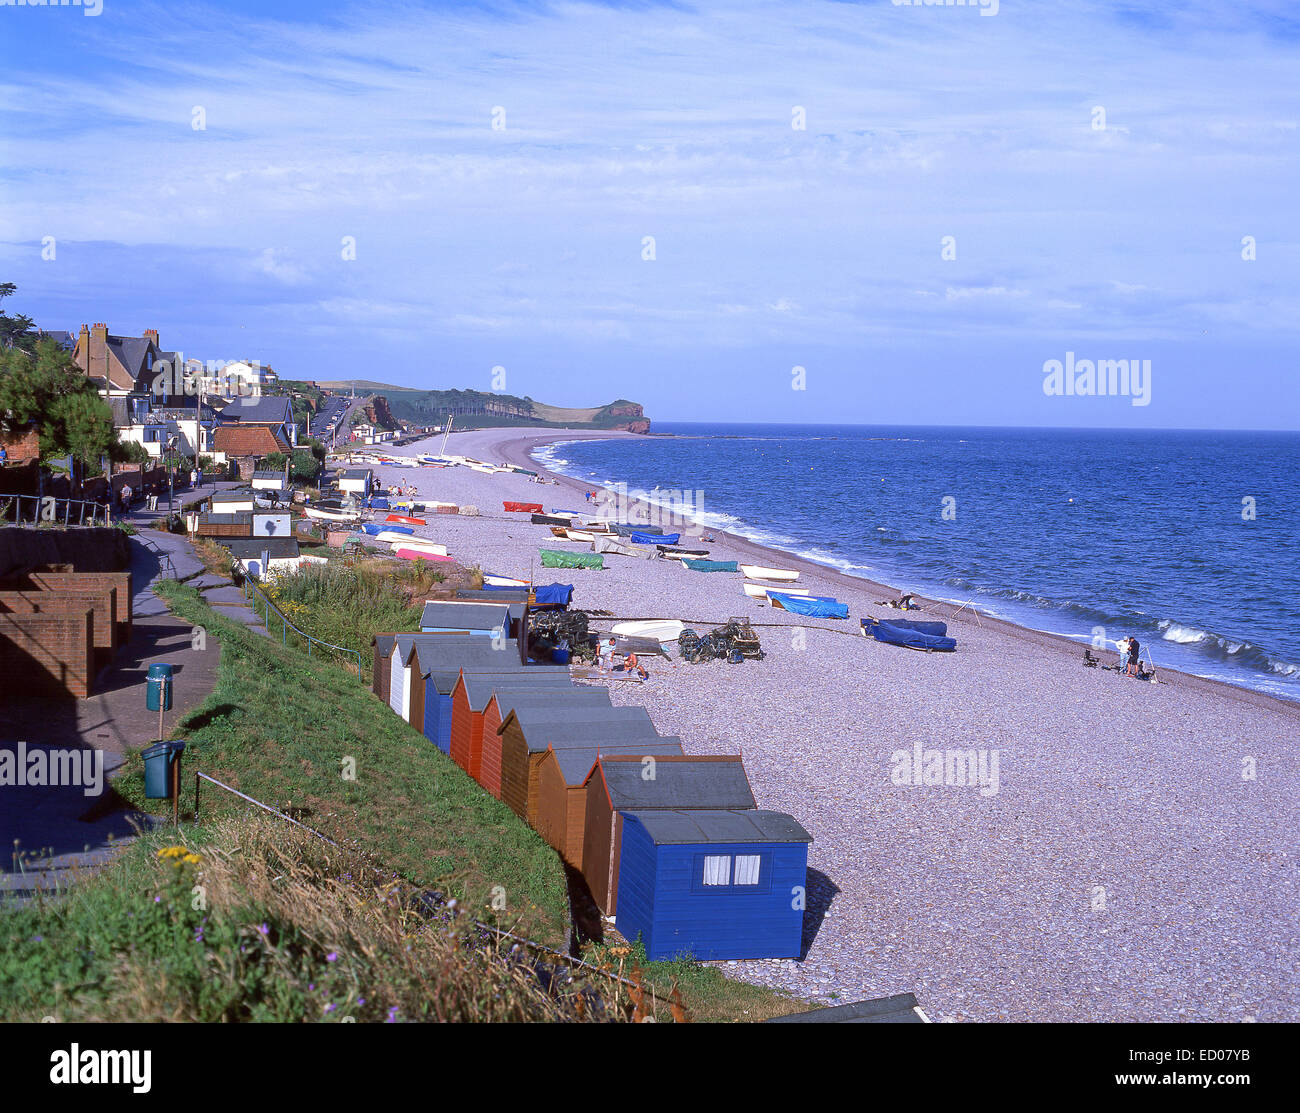 View of beach and town, Budleigh Salterton, Devon, England, United Kingdom Stock Photo